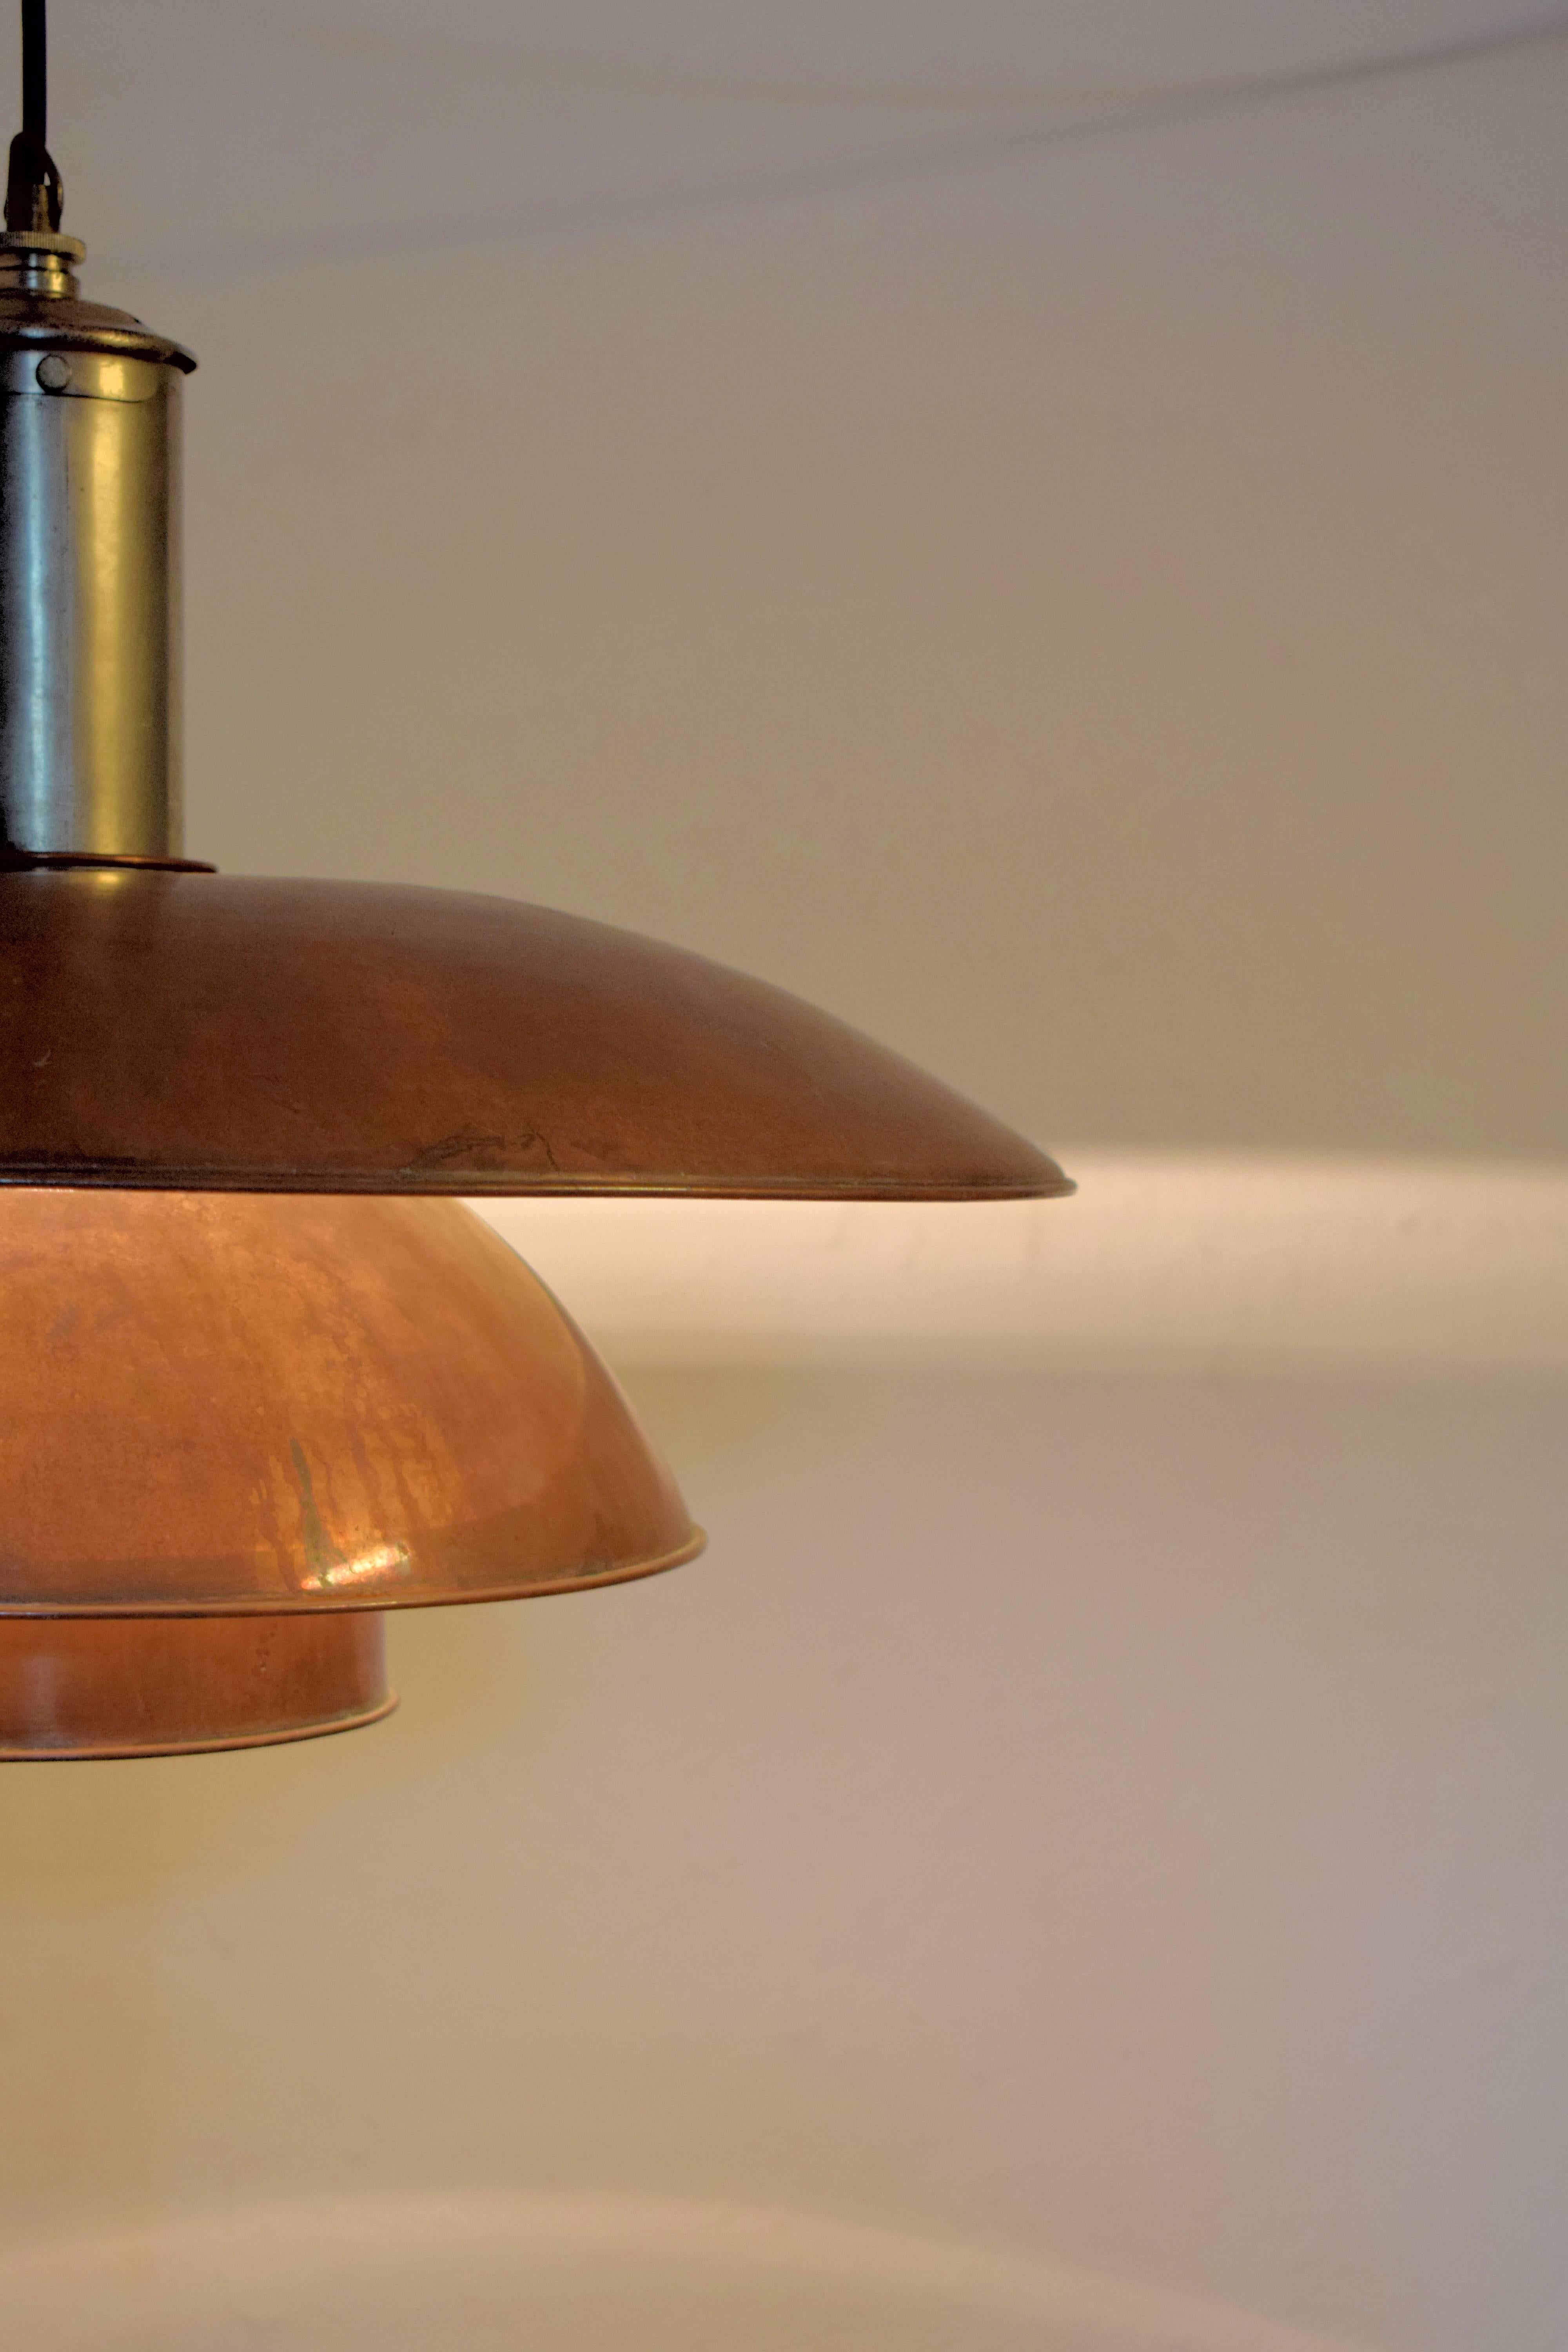 Poul Henningsen 6/6 pendant with copper shade, iron stem, cast tripod shade holder stamped Pat Appl
Produced by Louis Poulsen in 1926-1927, stamped PAT. APPL.
Has been made for a limited period only 1927-1928.